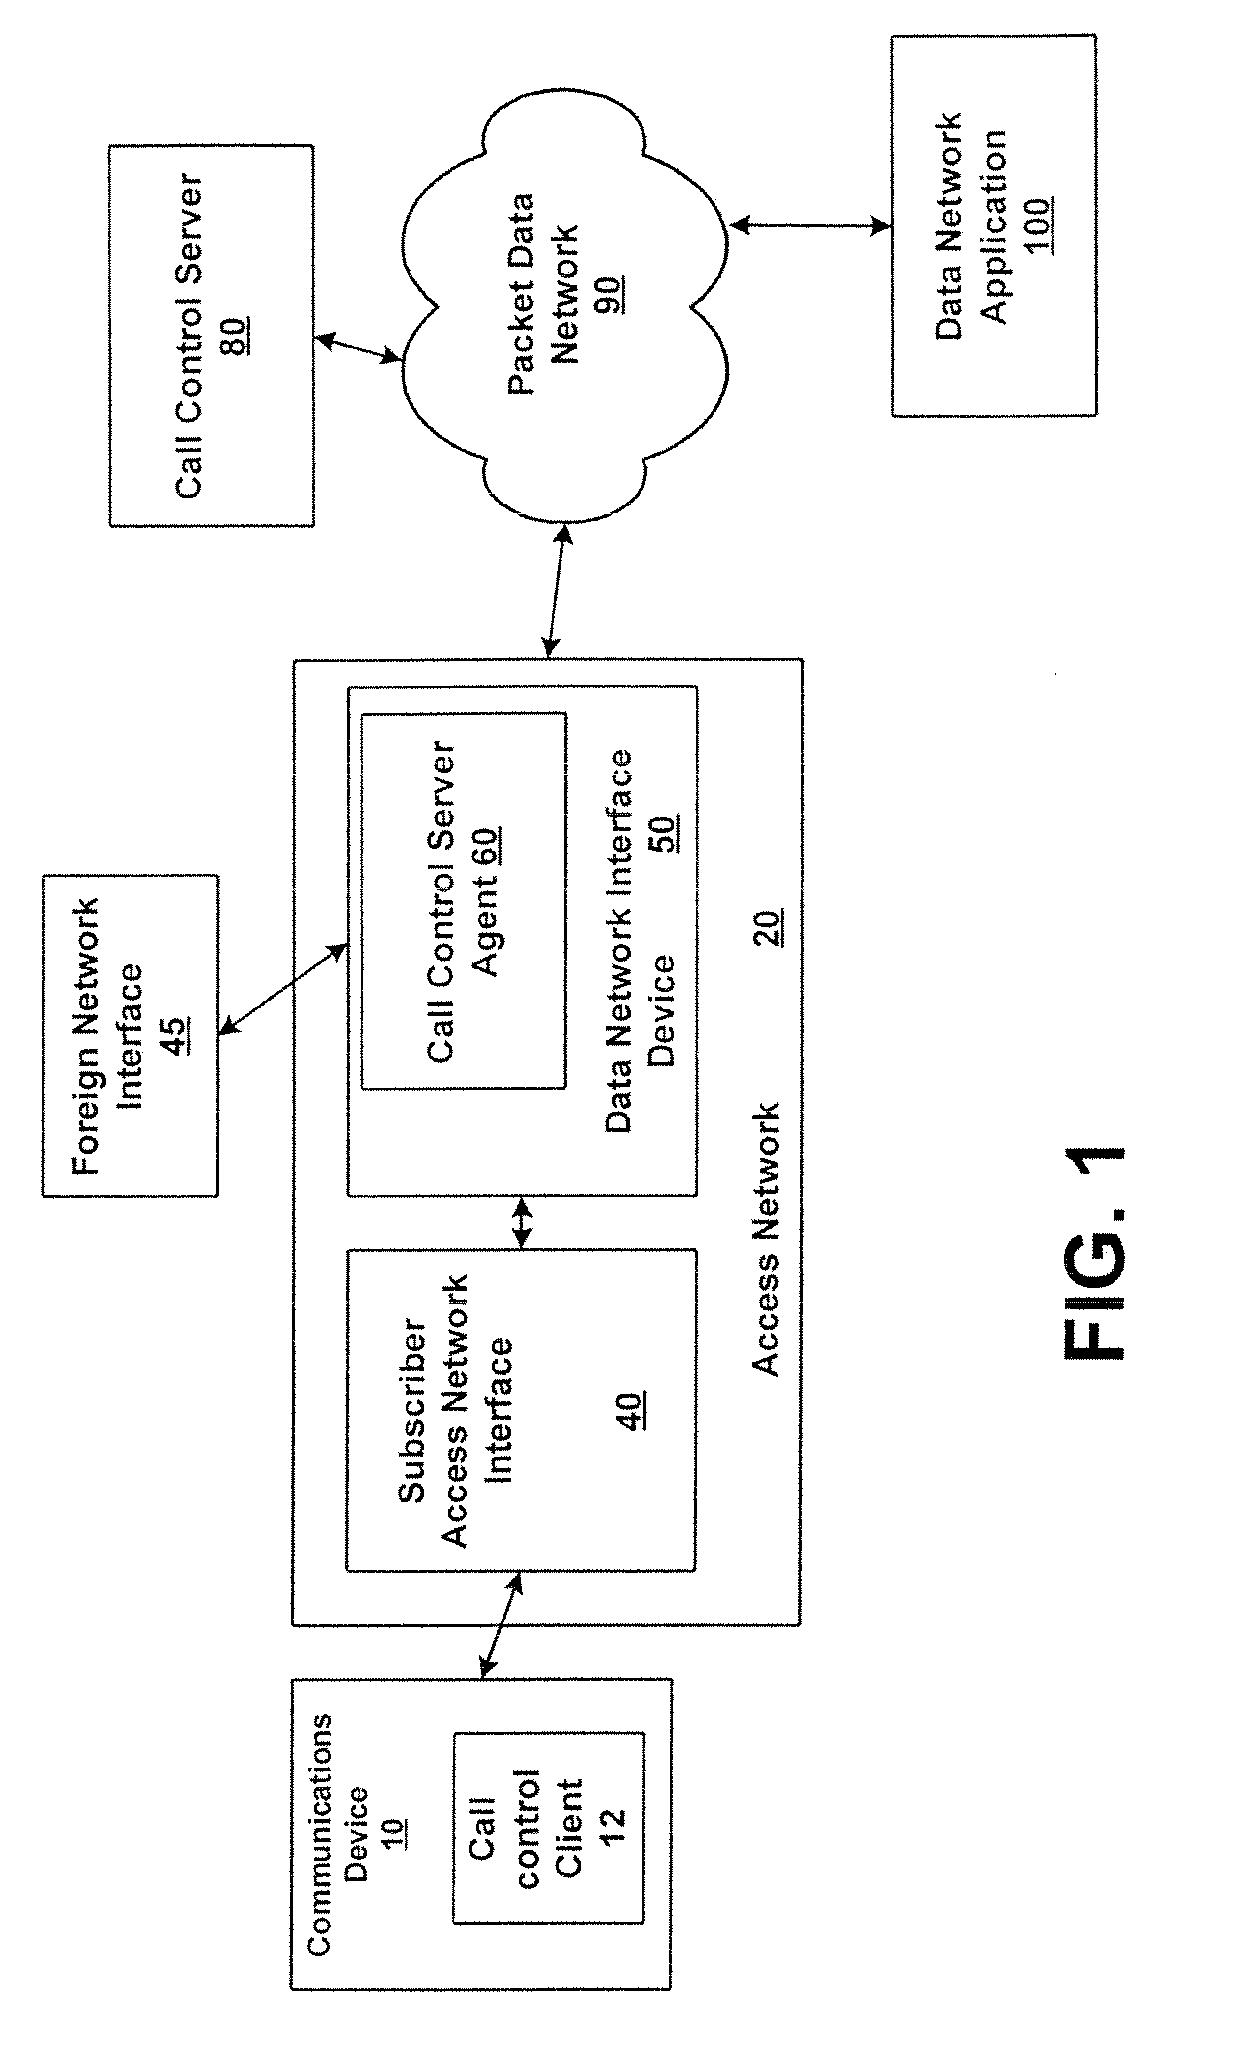 System and method for integrating call control and data network access components